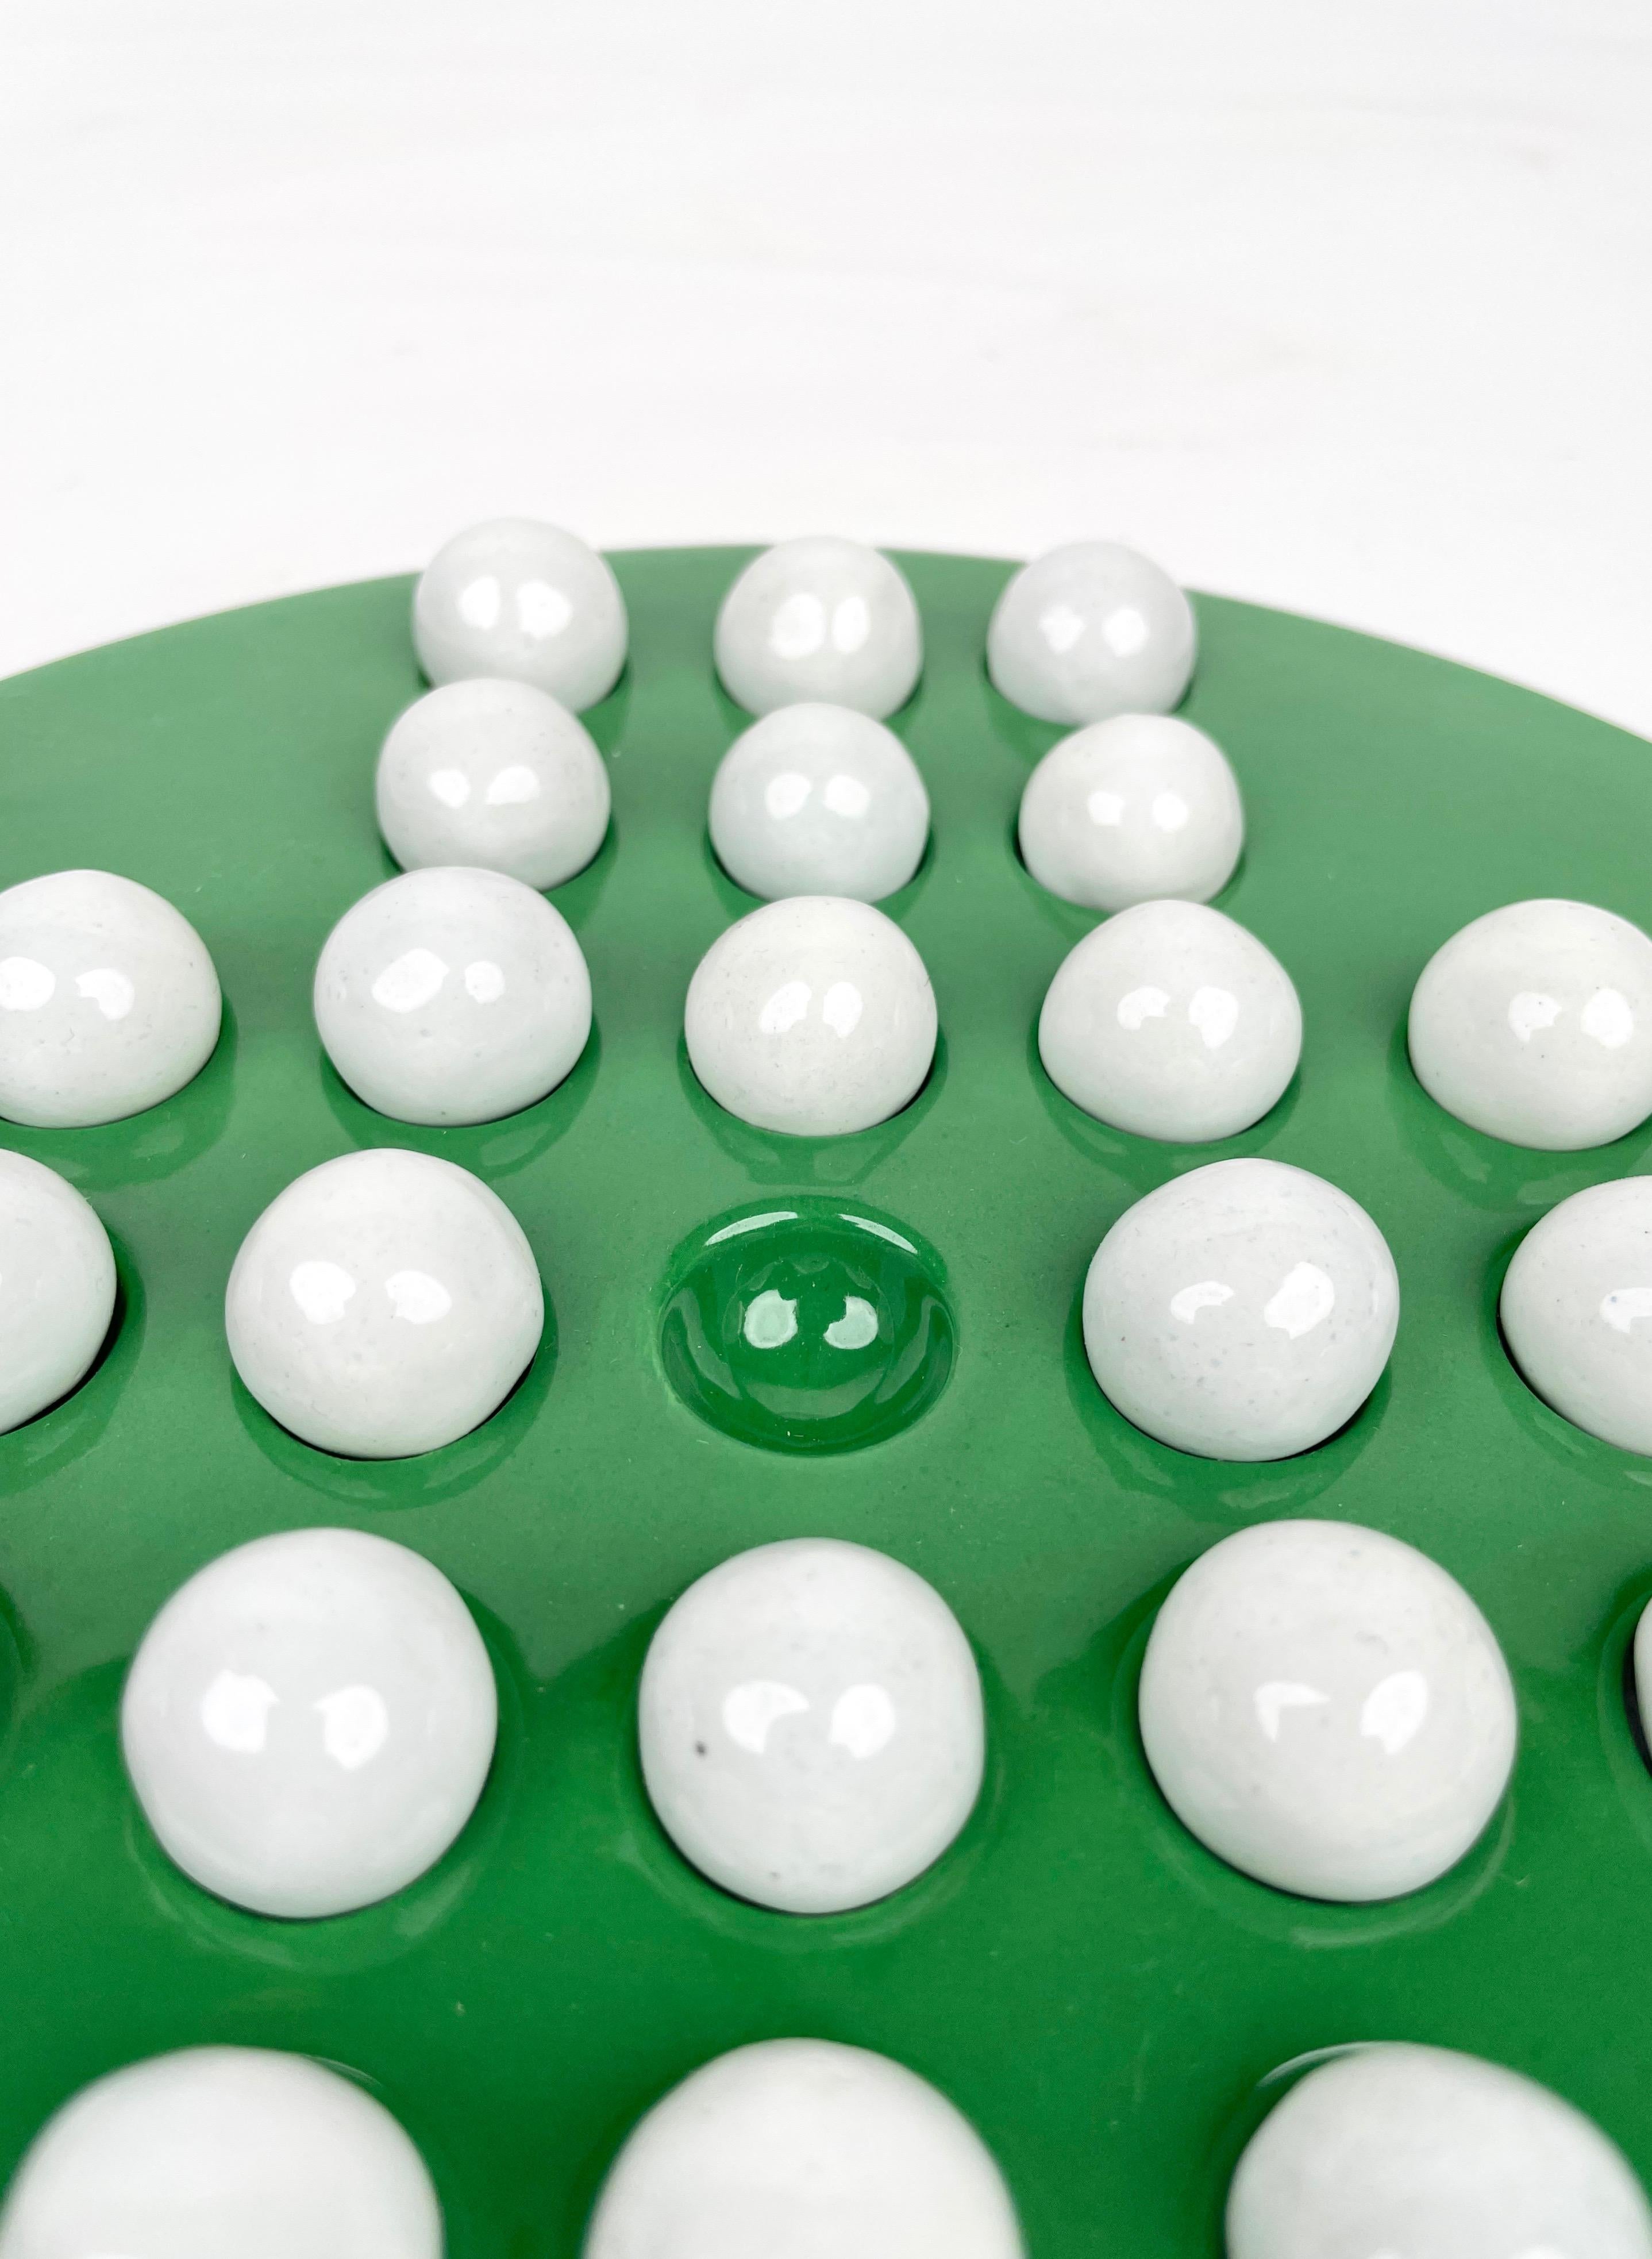 Checkers Game by Ennio Lucini for Gabbianelli Green & White Ceramic, Italy 1970s For Sale 5